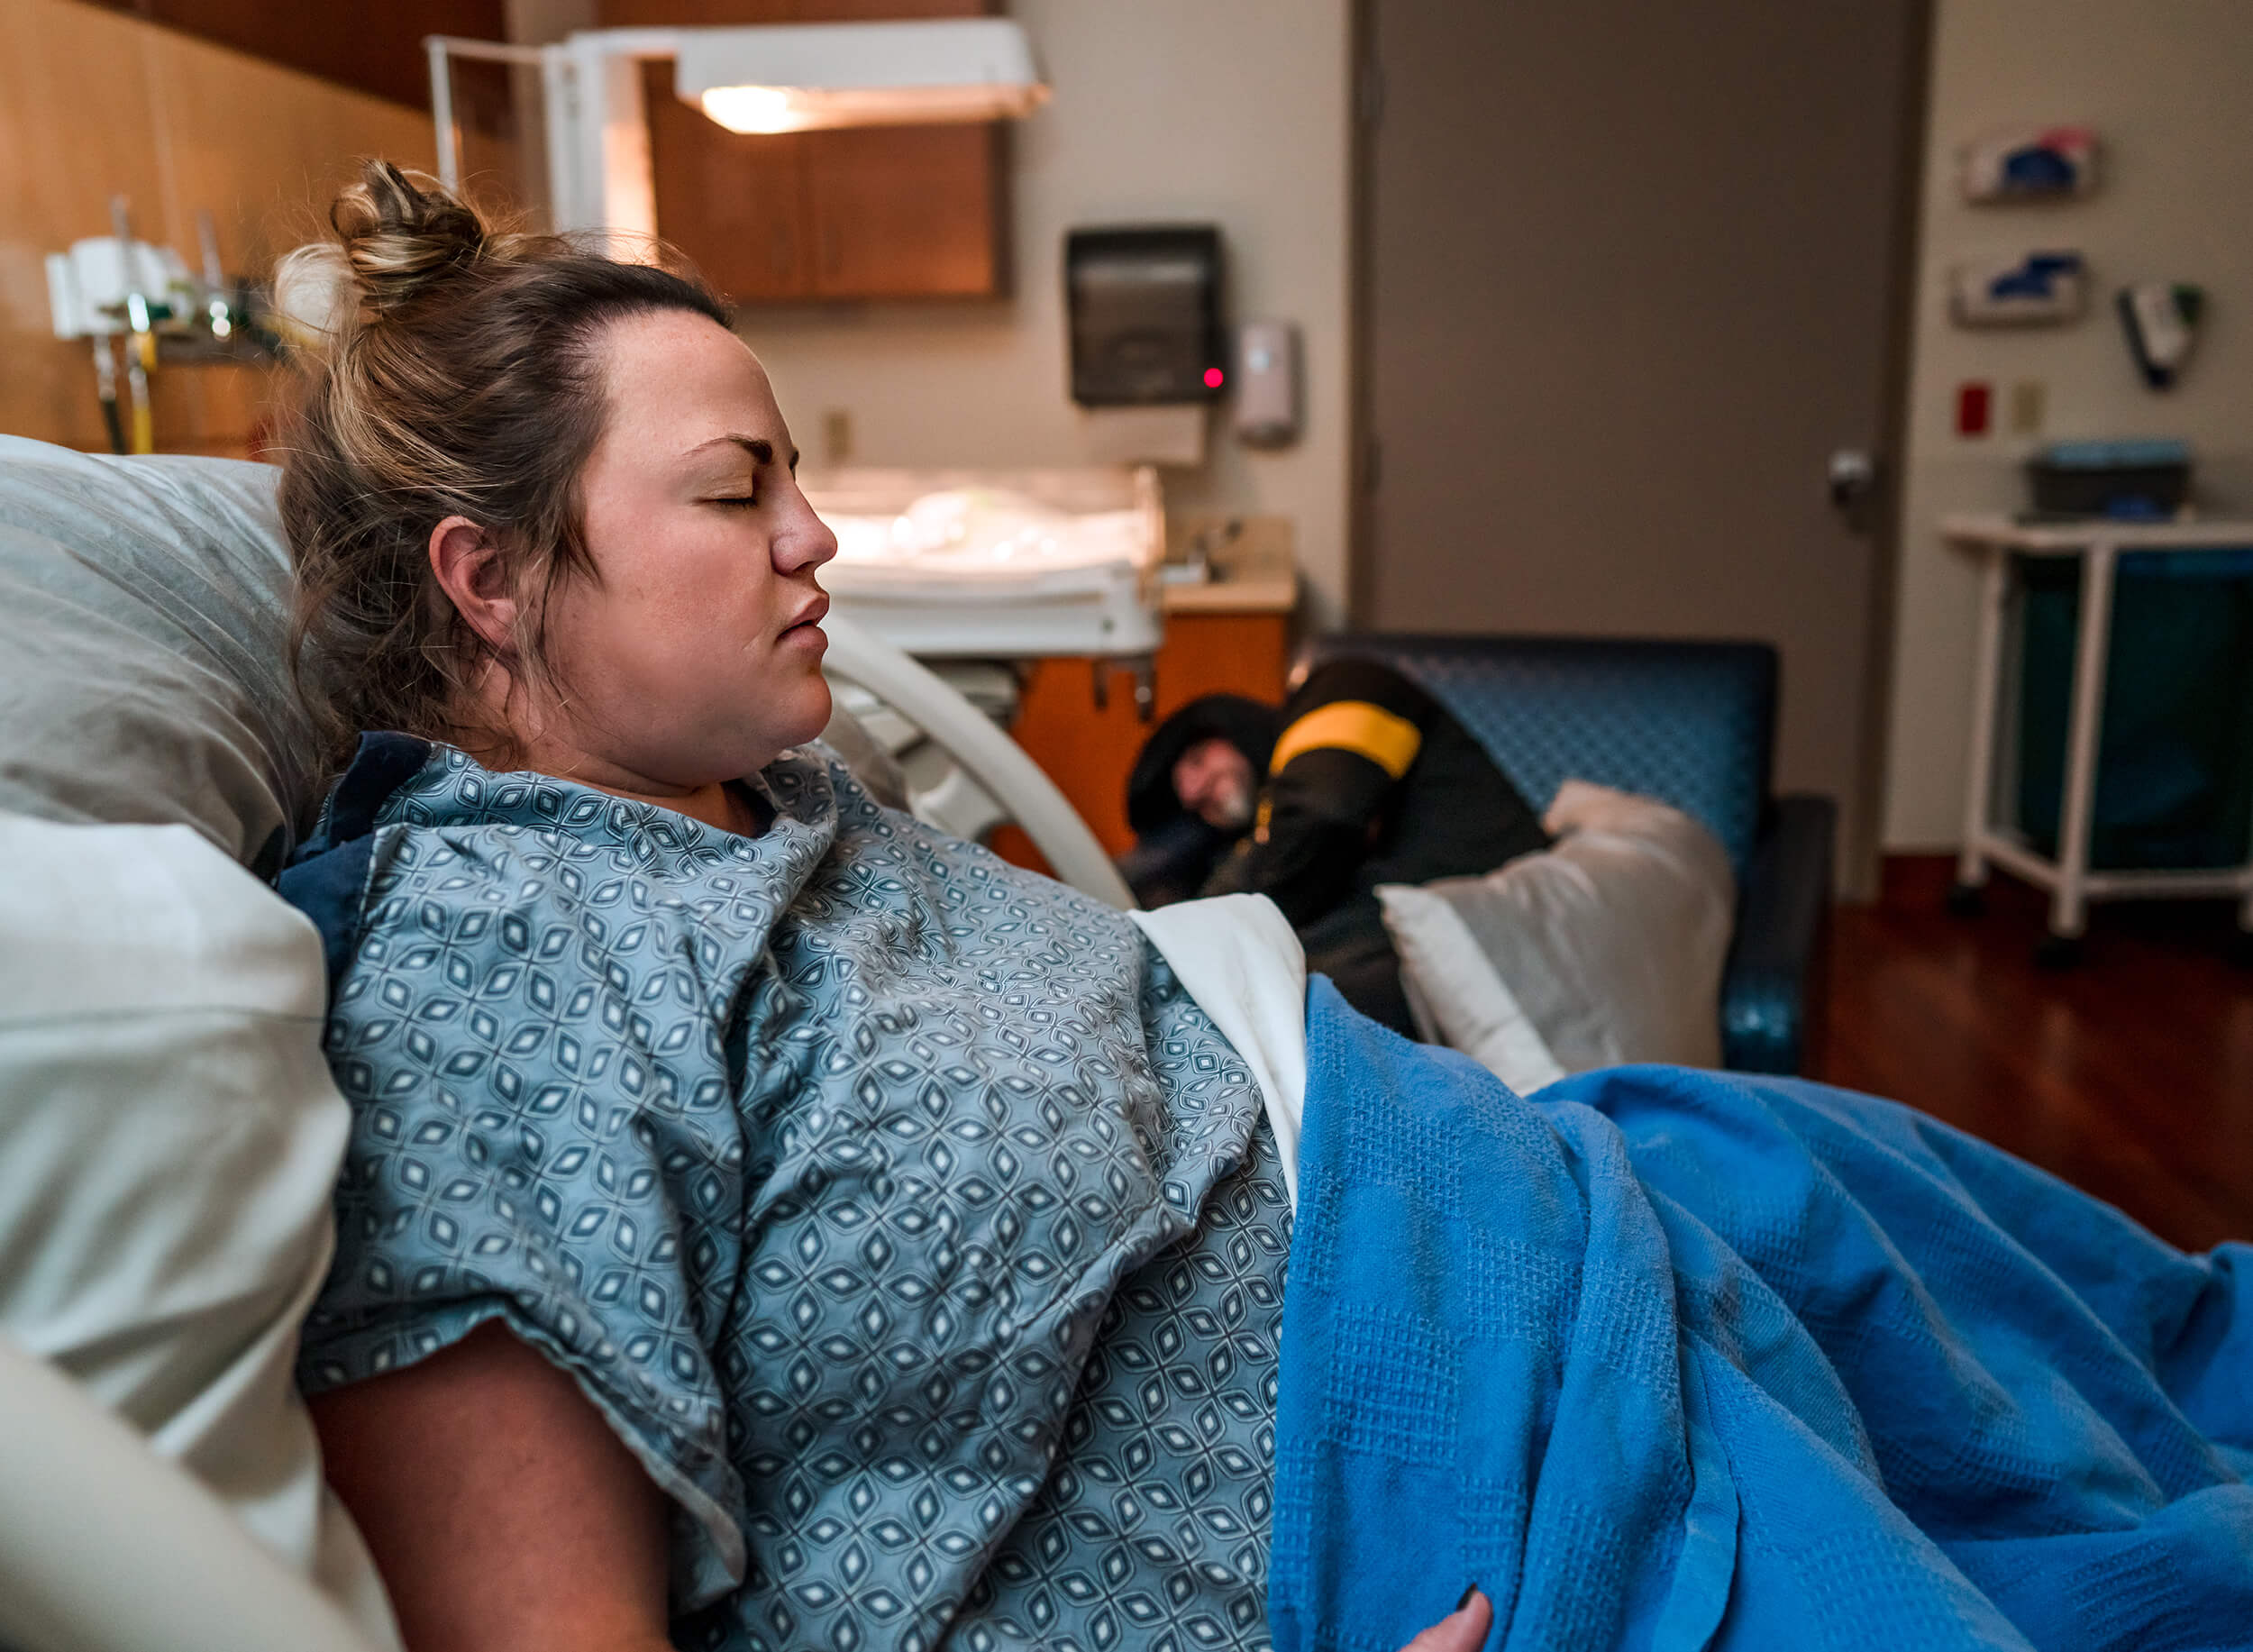 breathing through contractions while in labor at Summerlin hospital